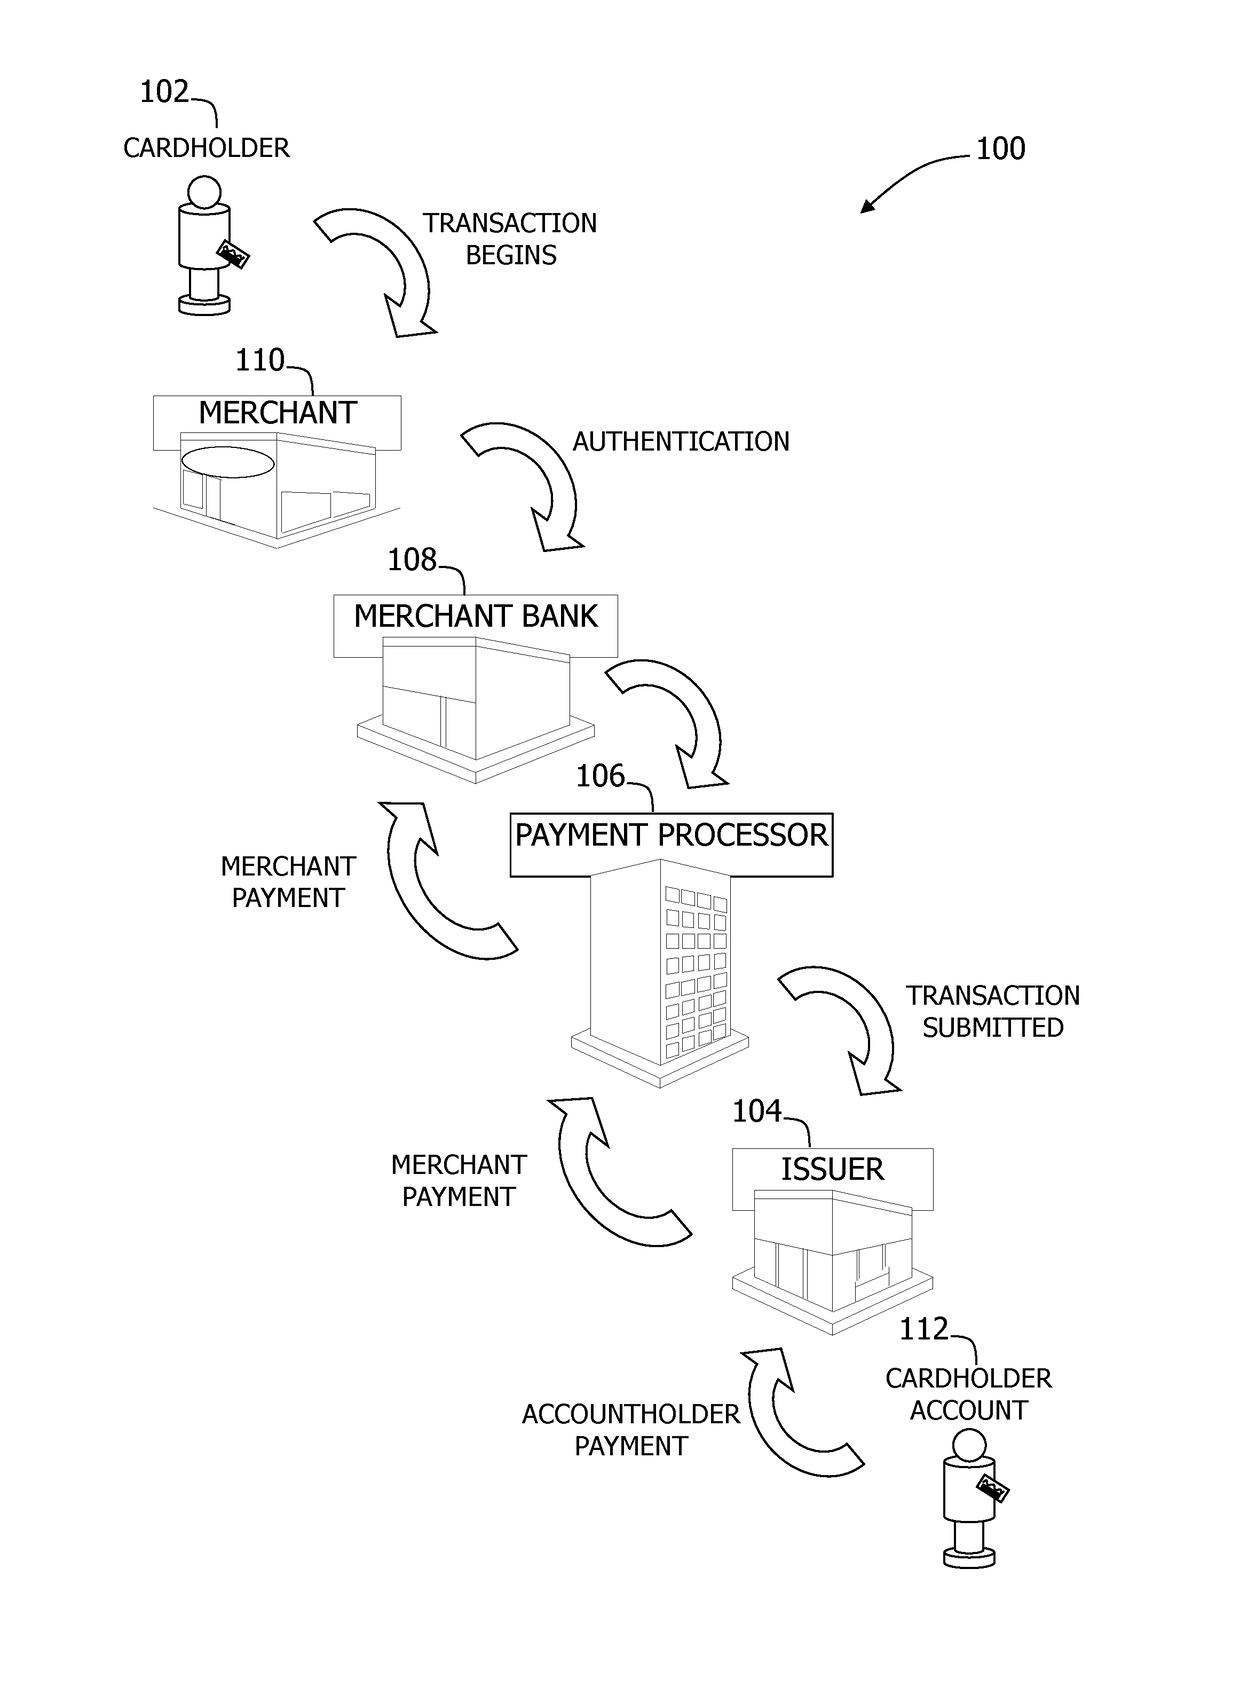 Communication network and method for processing pre-chargeback disputes